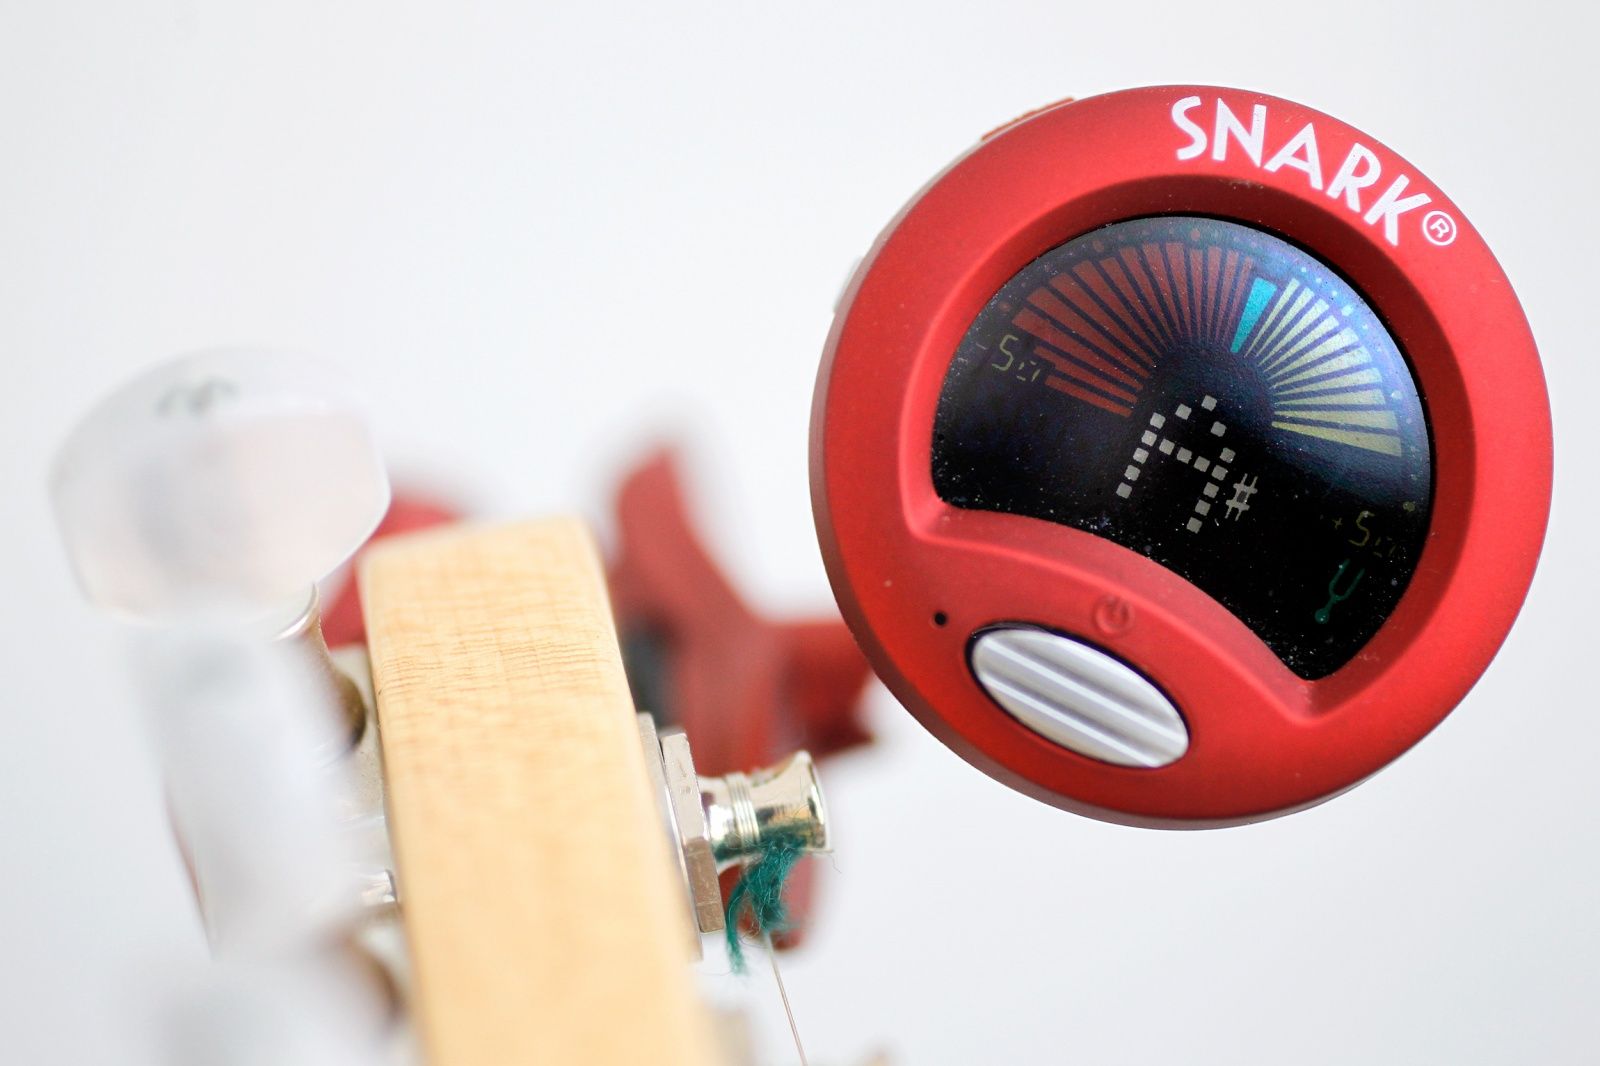 If you don't have a dedicated roadie or one of those robotic tuning guitars, there's no easier way to tune your ax than with a Snark. Just squeeze the thumb-size mount and slide your headstock between the rubberized grips. Then press the little button on the front of the Snark's colorful LCD readout, pluck a string and get your instrument ready to play.


Lightweight and accurate, the Snark SN-2 All Instrument Tuner works with acoustic or electric guitars and basses, mandolins, banjos, whatever. It's perfect for situations like in-studio radio shows, where you don't want to drag around a stompbox tuner or a large amp that might have one built-in tuner. It also boasts pitch calibration, which lets you tune to something besides A-440, and a metronome that I can't complain about because I've never used it. The Snark SN-2 is a great buy at $39 list (and a steal at Amazon's price of $12.99). — Lewis Wallace


Photo: Jim Merithew/Cult of Mac